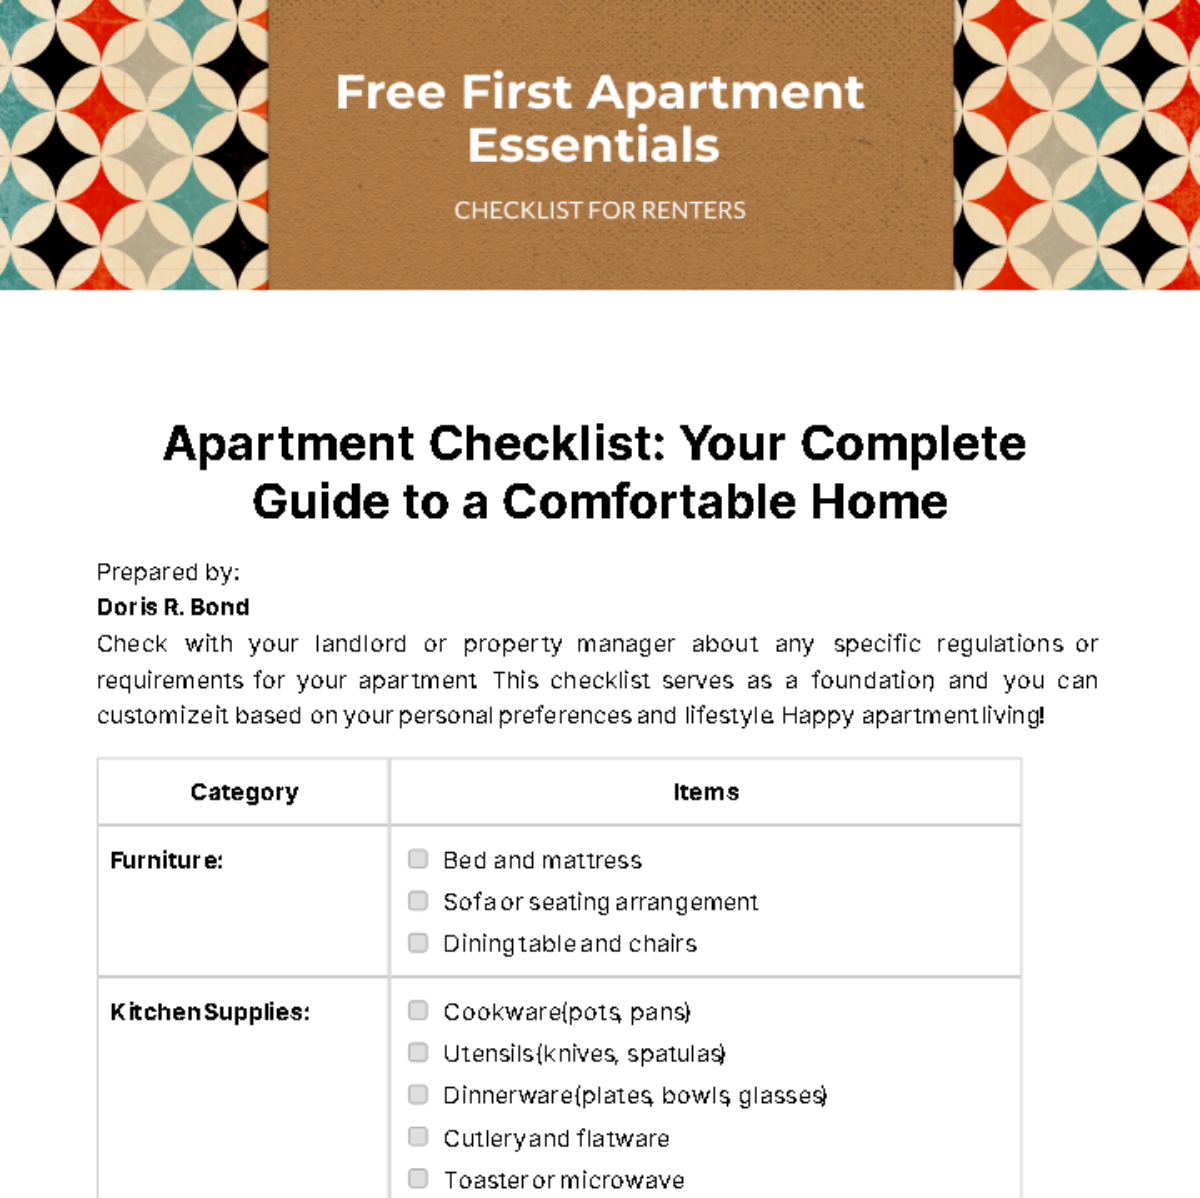 First Apartment Essentials Checklist For Renters Template